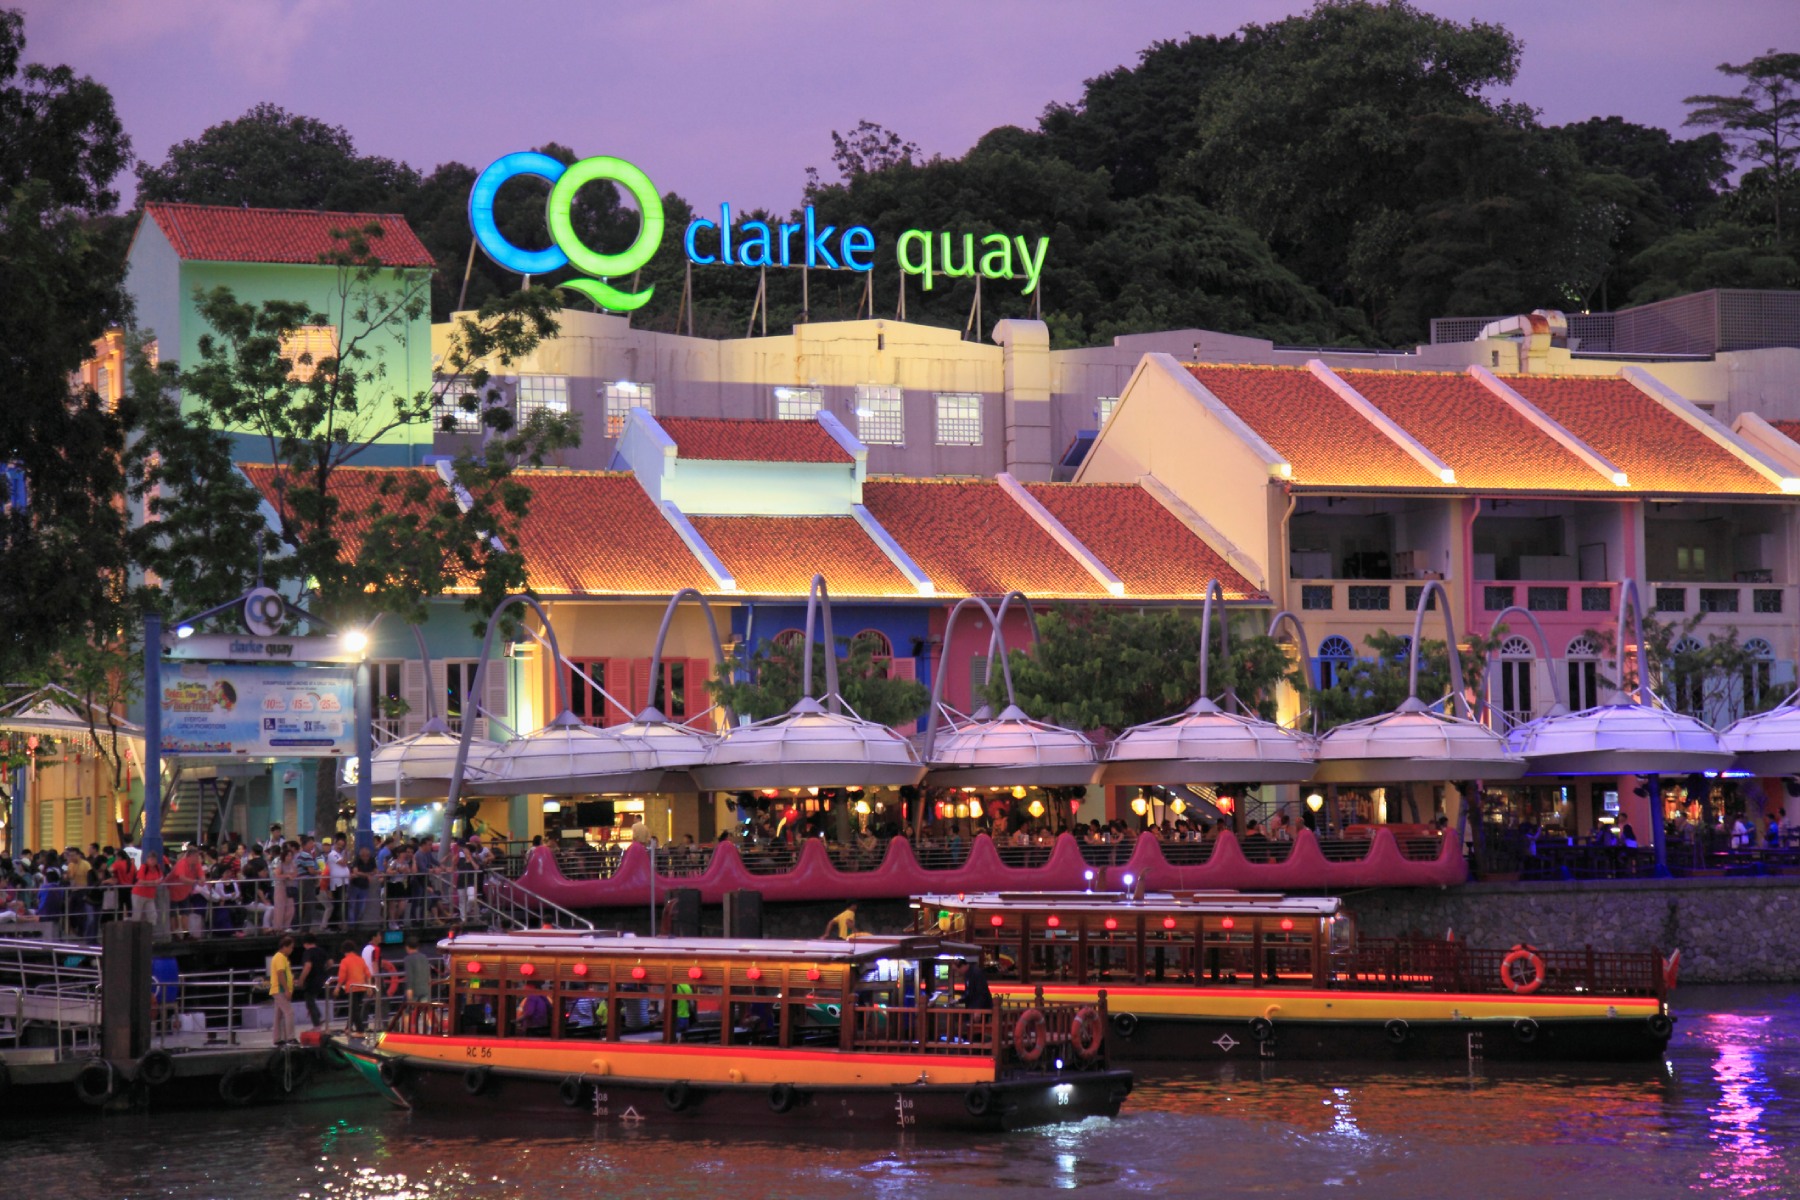 A nighttime shot of Clarke Quay, with busy bars and restaurants lit up along the Singapore River.